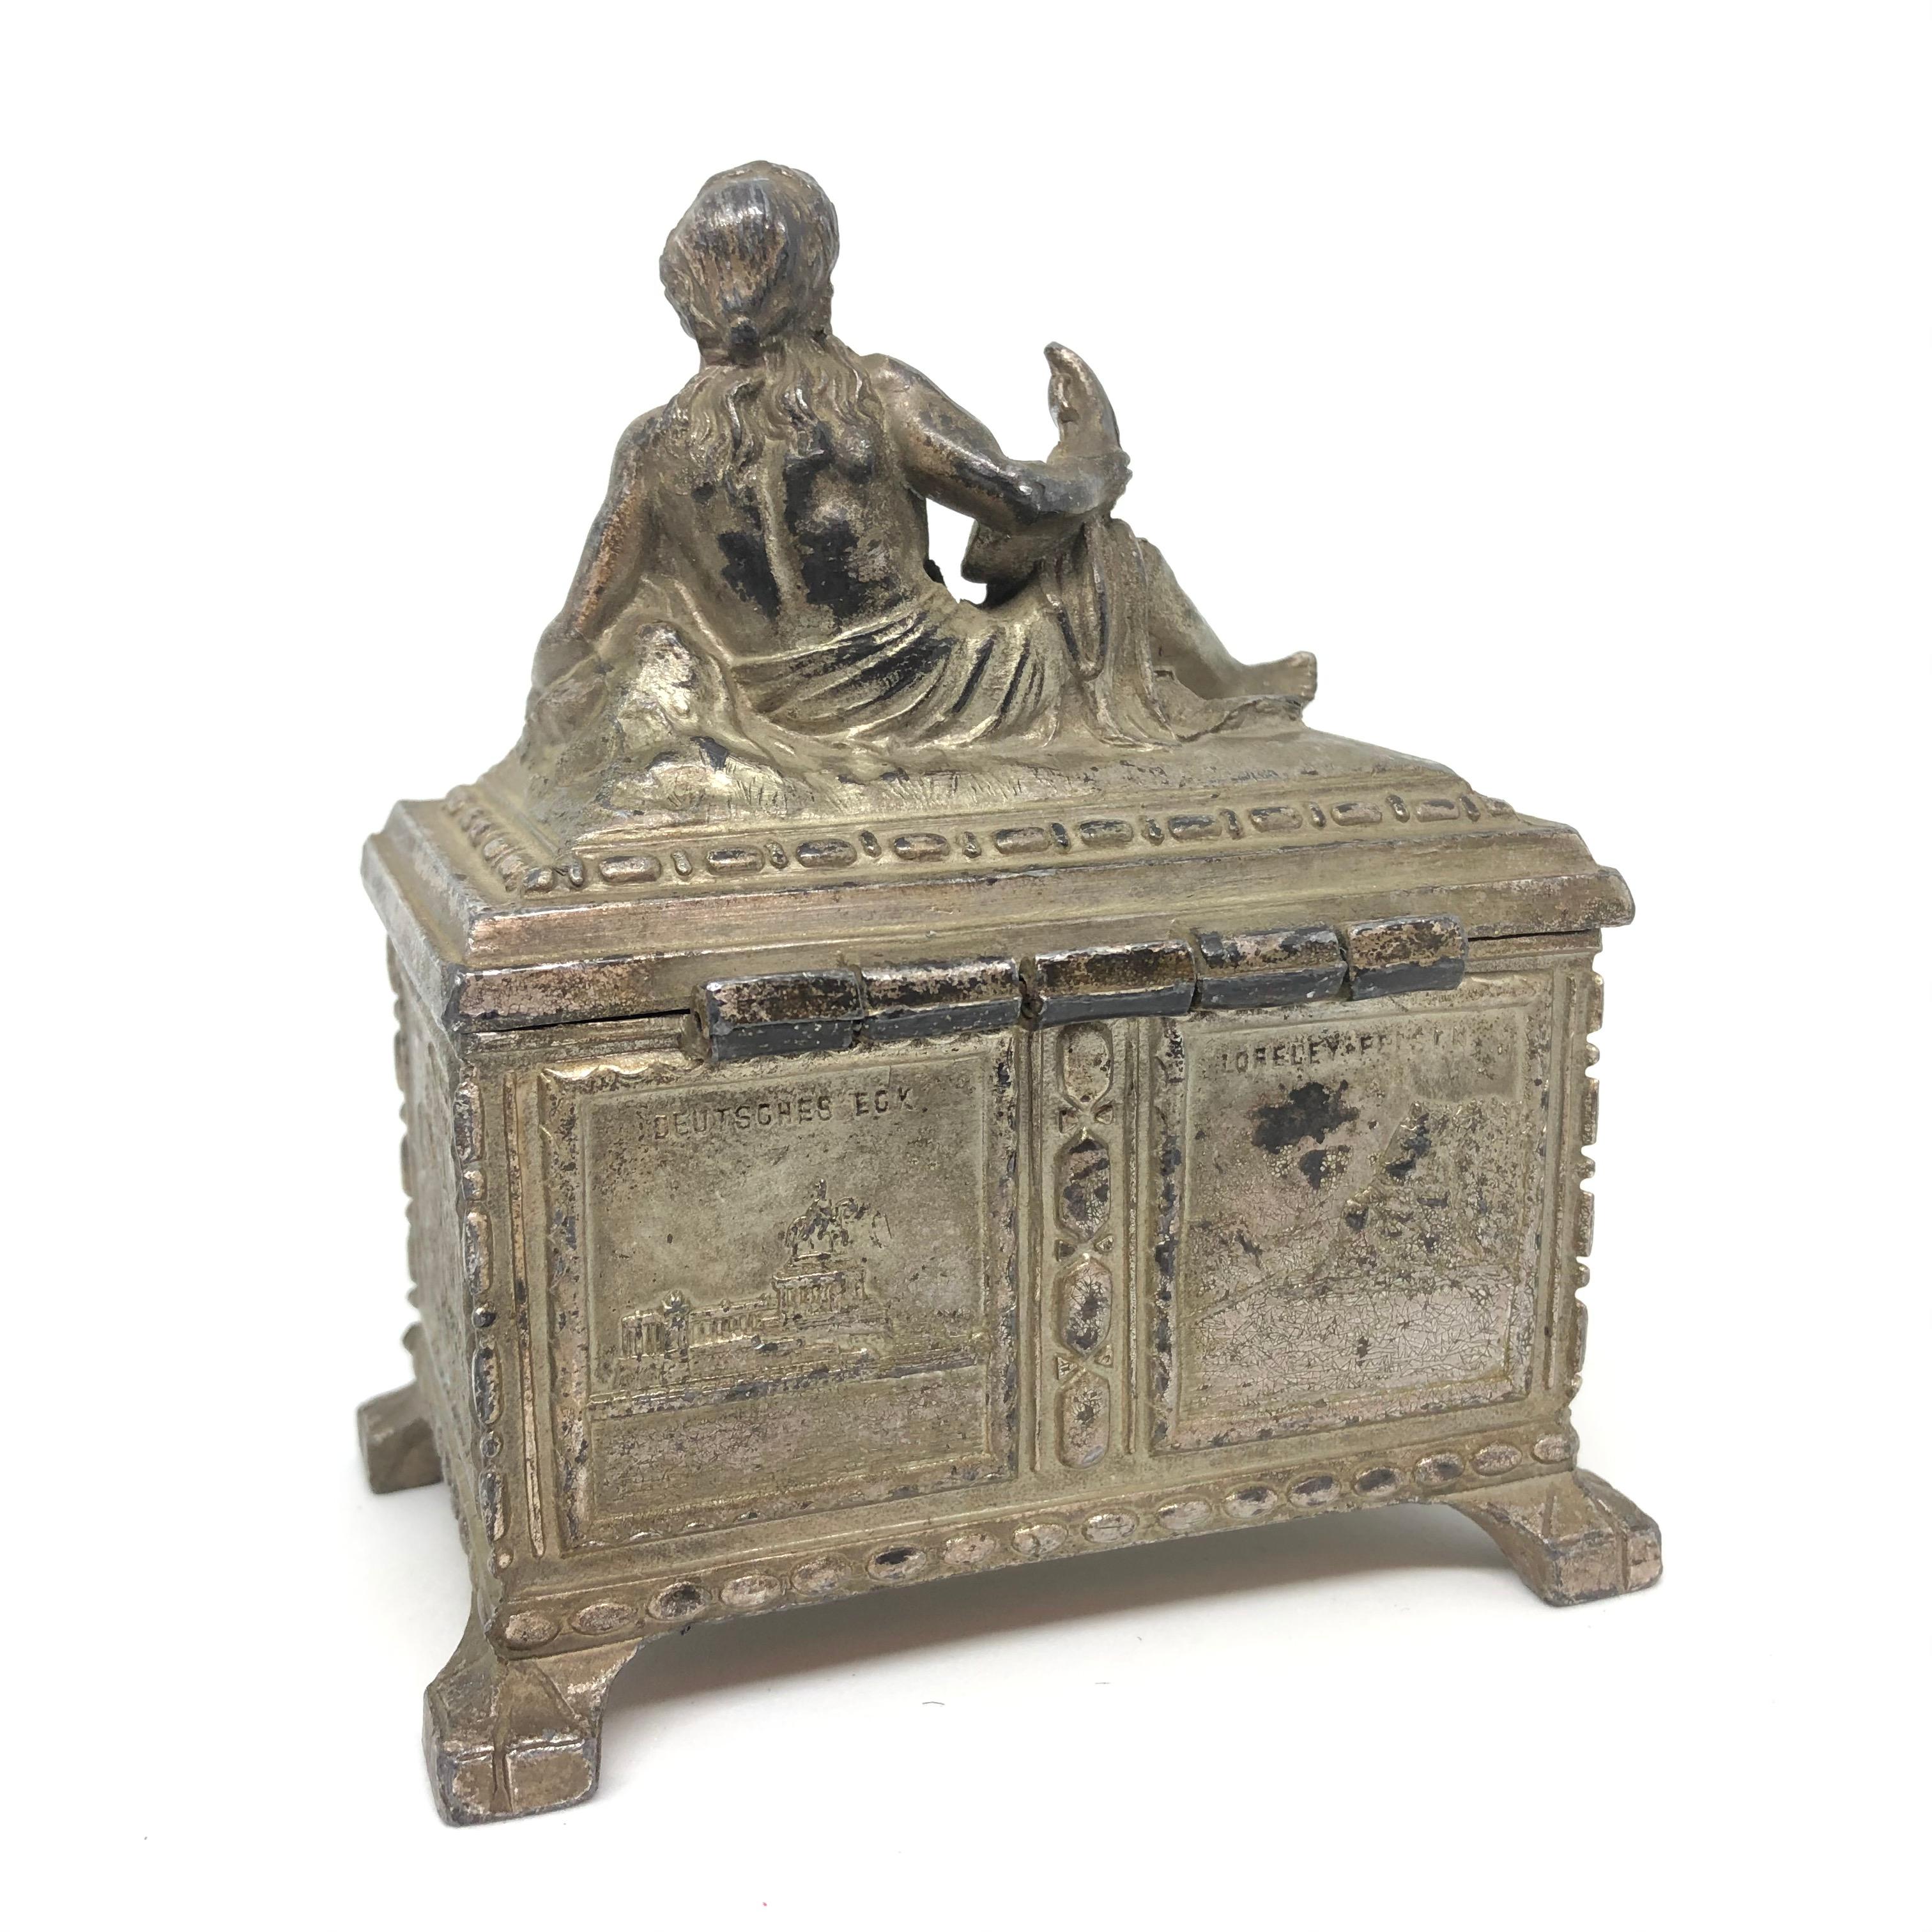 Gorgeous vintage metal jewelry box. A beautiful decorative item in metal inside covered with fabric. Made in Germany, circa 1910s. Nice addition to any collection, dressing room, living room or just as a decorative item everywhere.